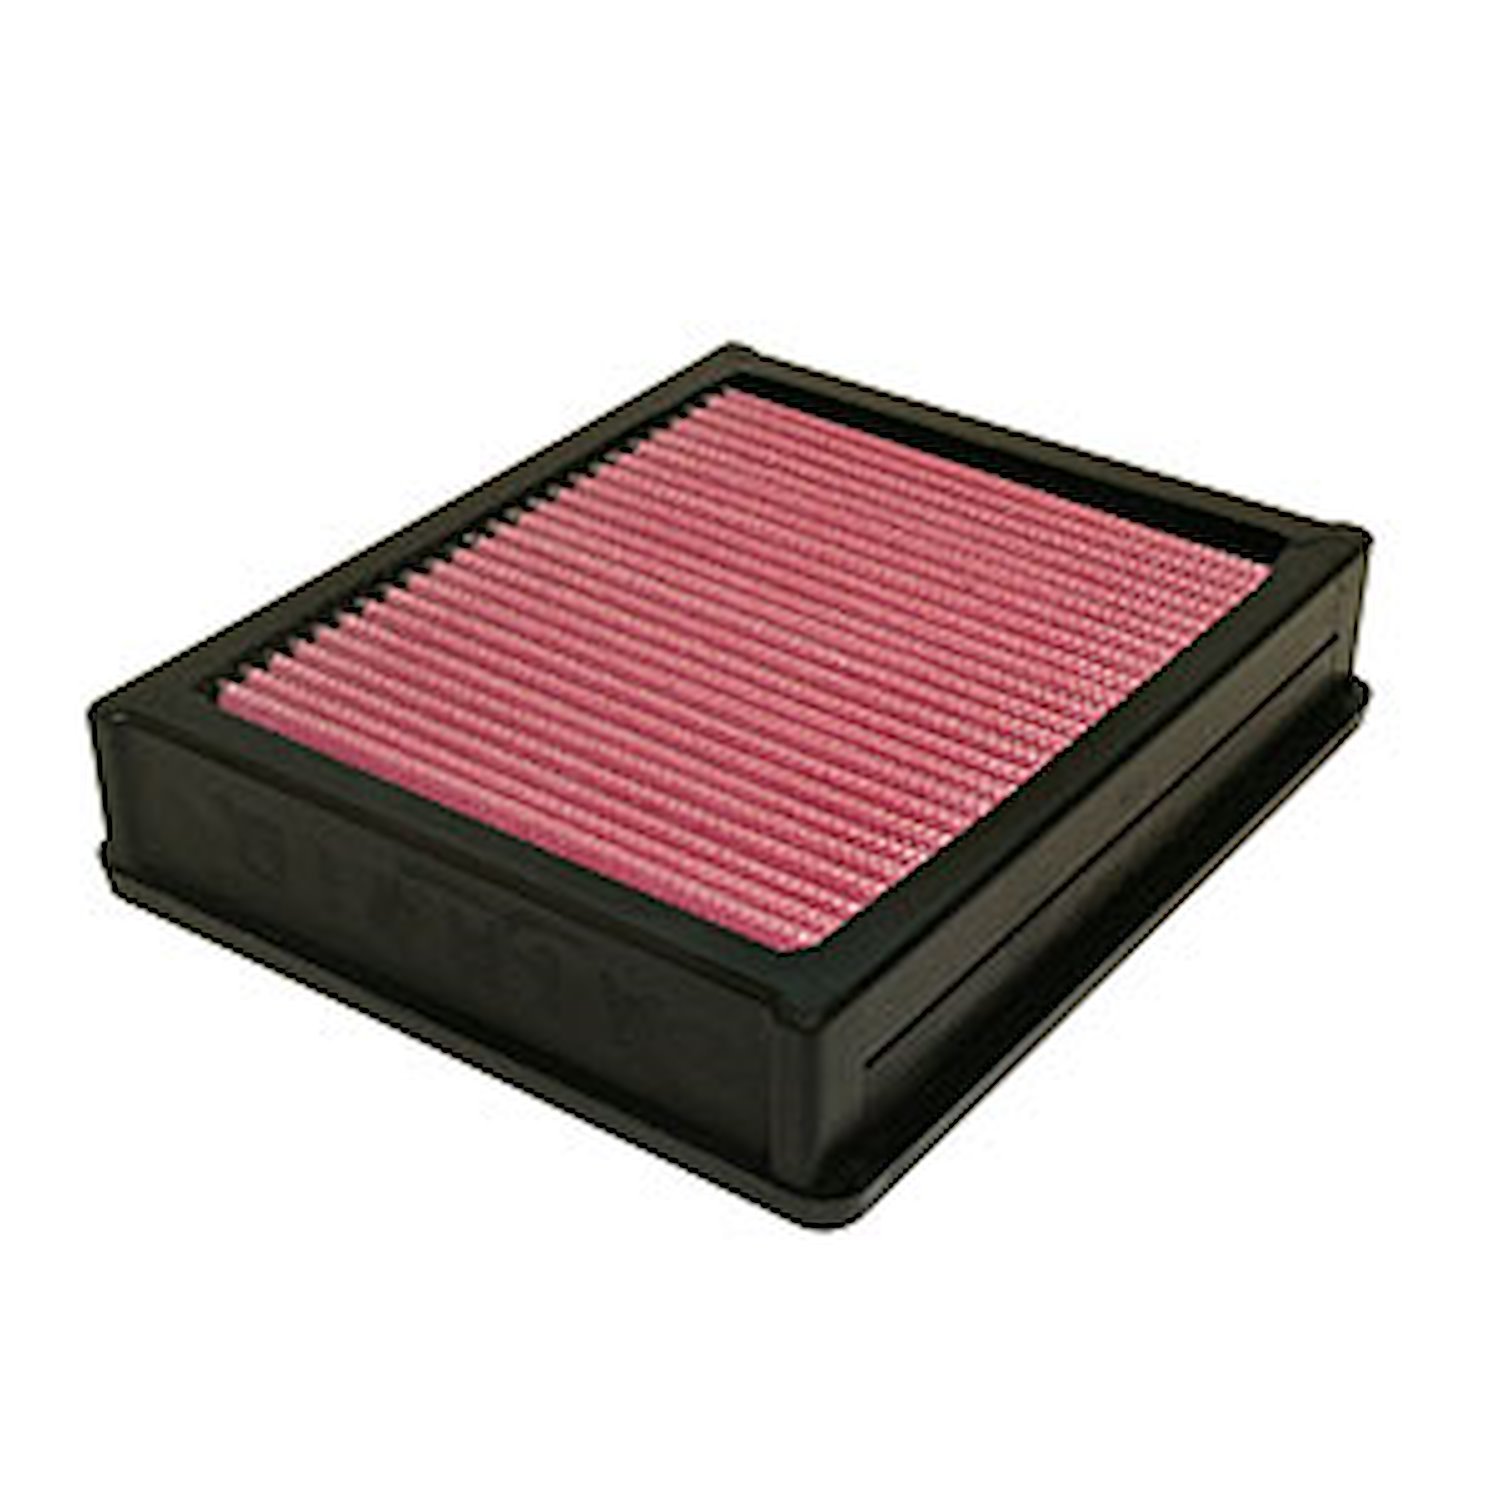 SynthaMax "Dry" OE Replacement Filter 1992-2000 Lexus SC300 3.0L